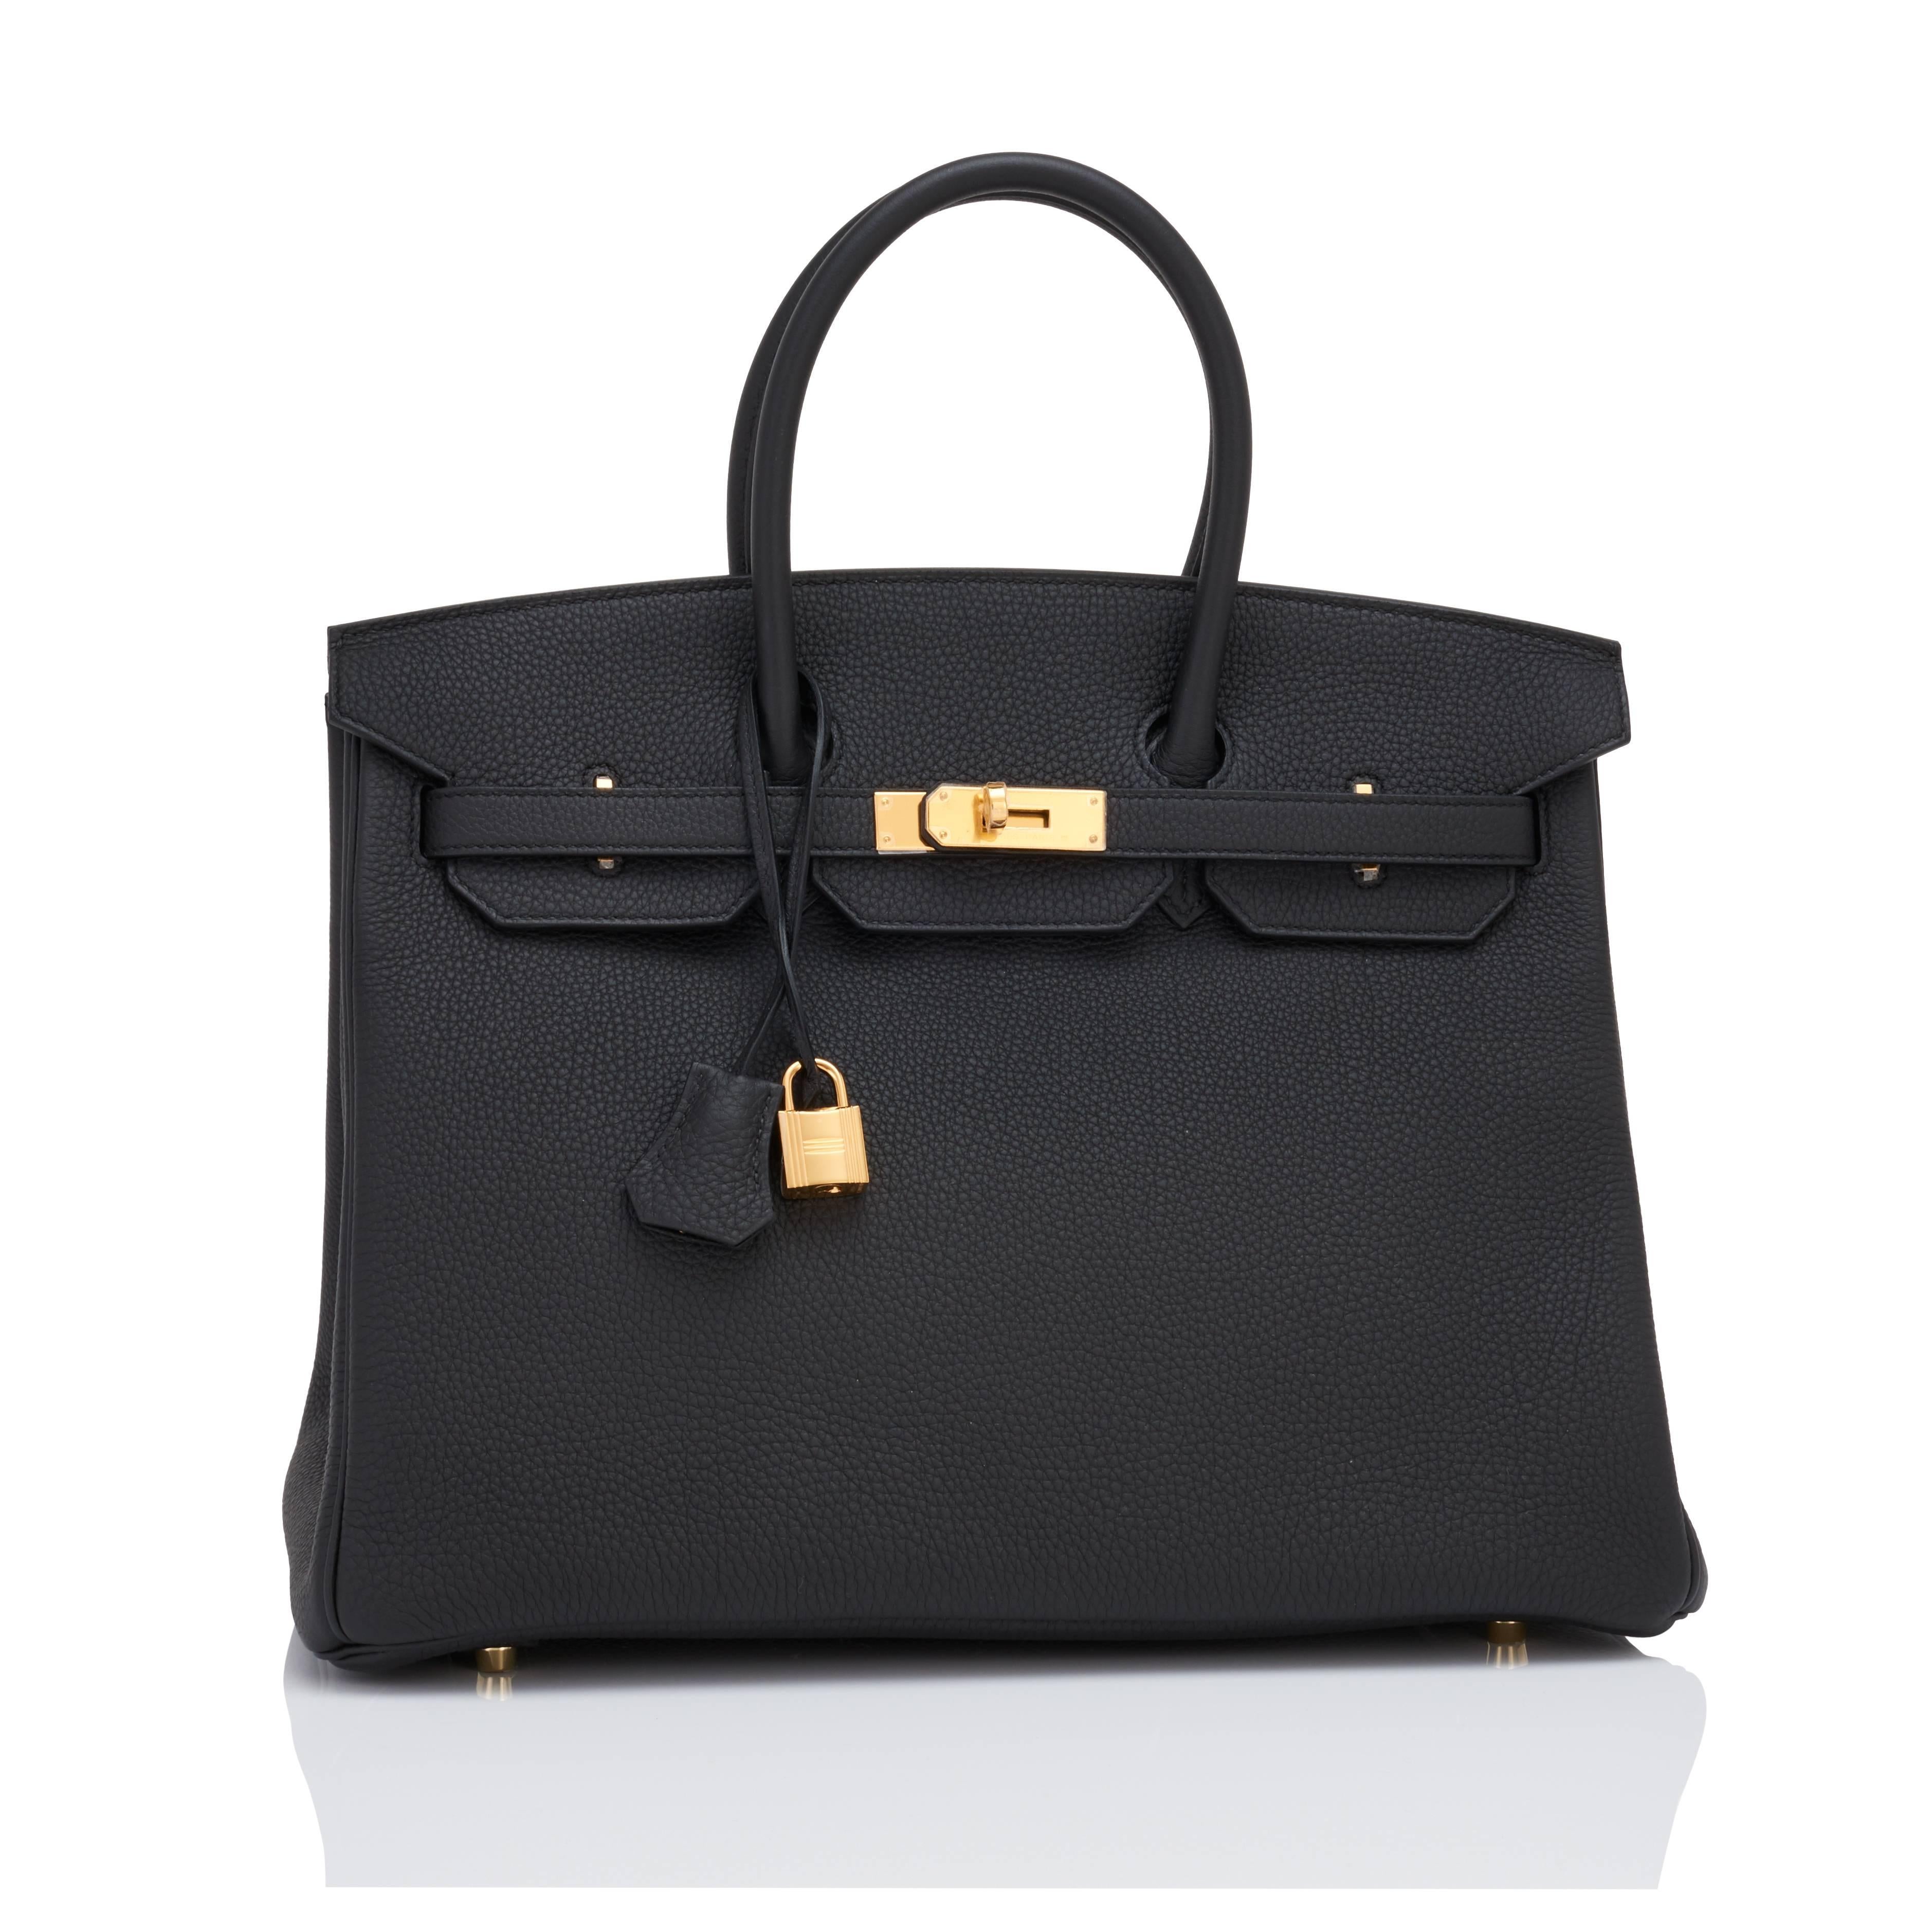 Hermes Black Togo 35cm Birkin Gold Hardware Power Birkin C Stamp
Brand New in Box. Store fresh. Pristine Condition (with plastic on hardware). 
Just purchased from Hermes store; bag bears new 2018 interior C stamp.
Perfect gift! Comes with lock,